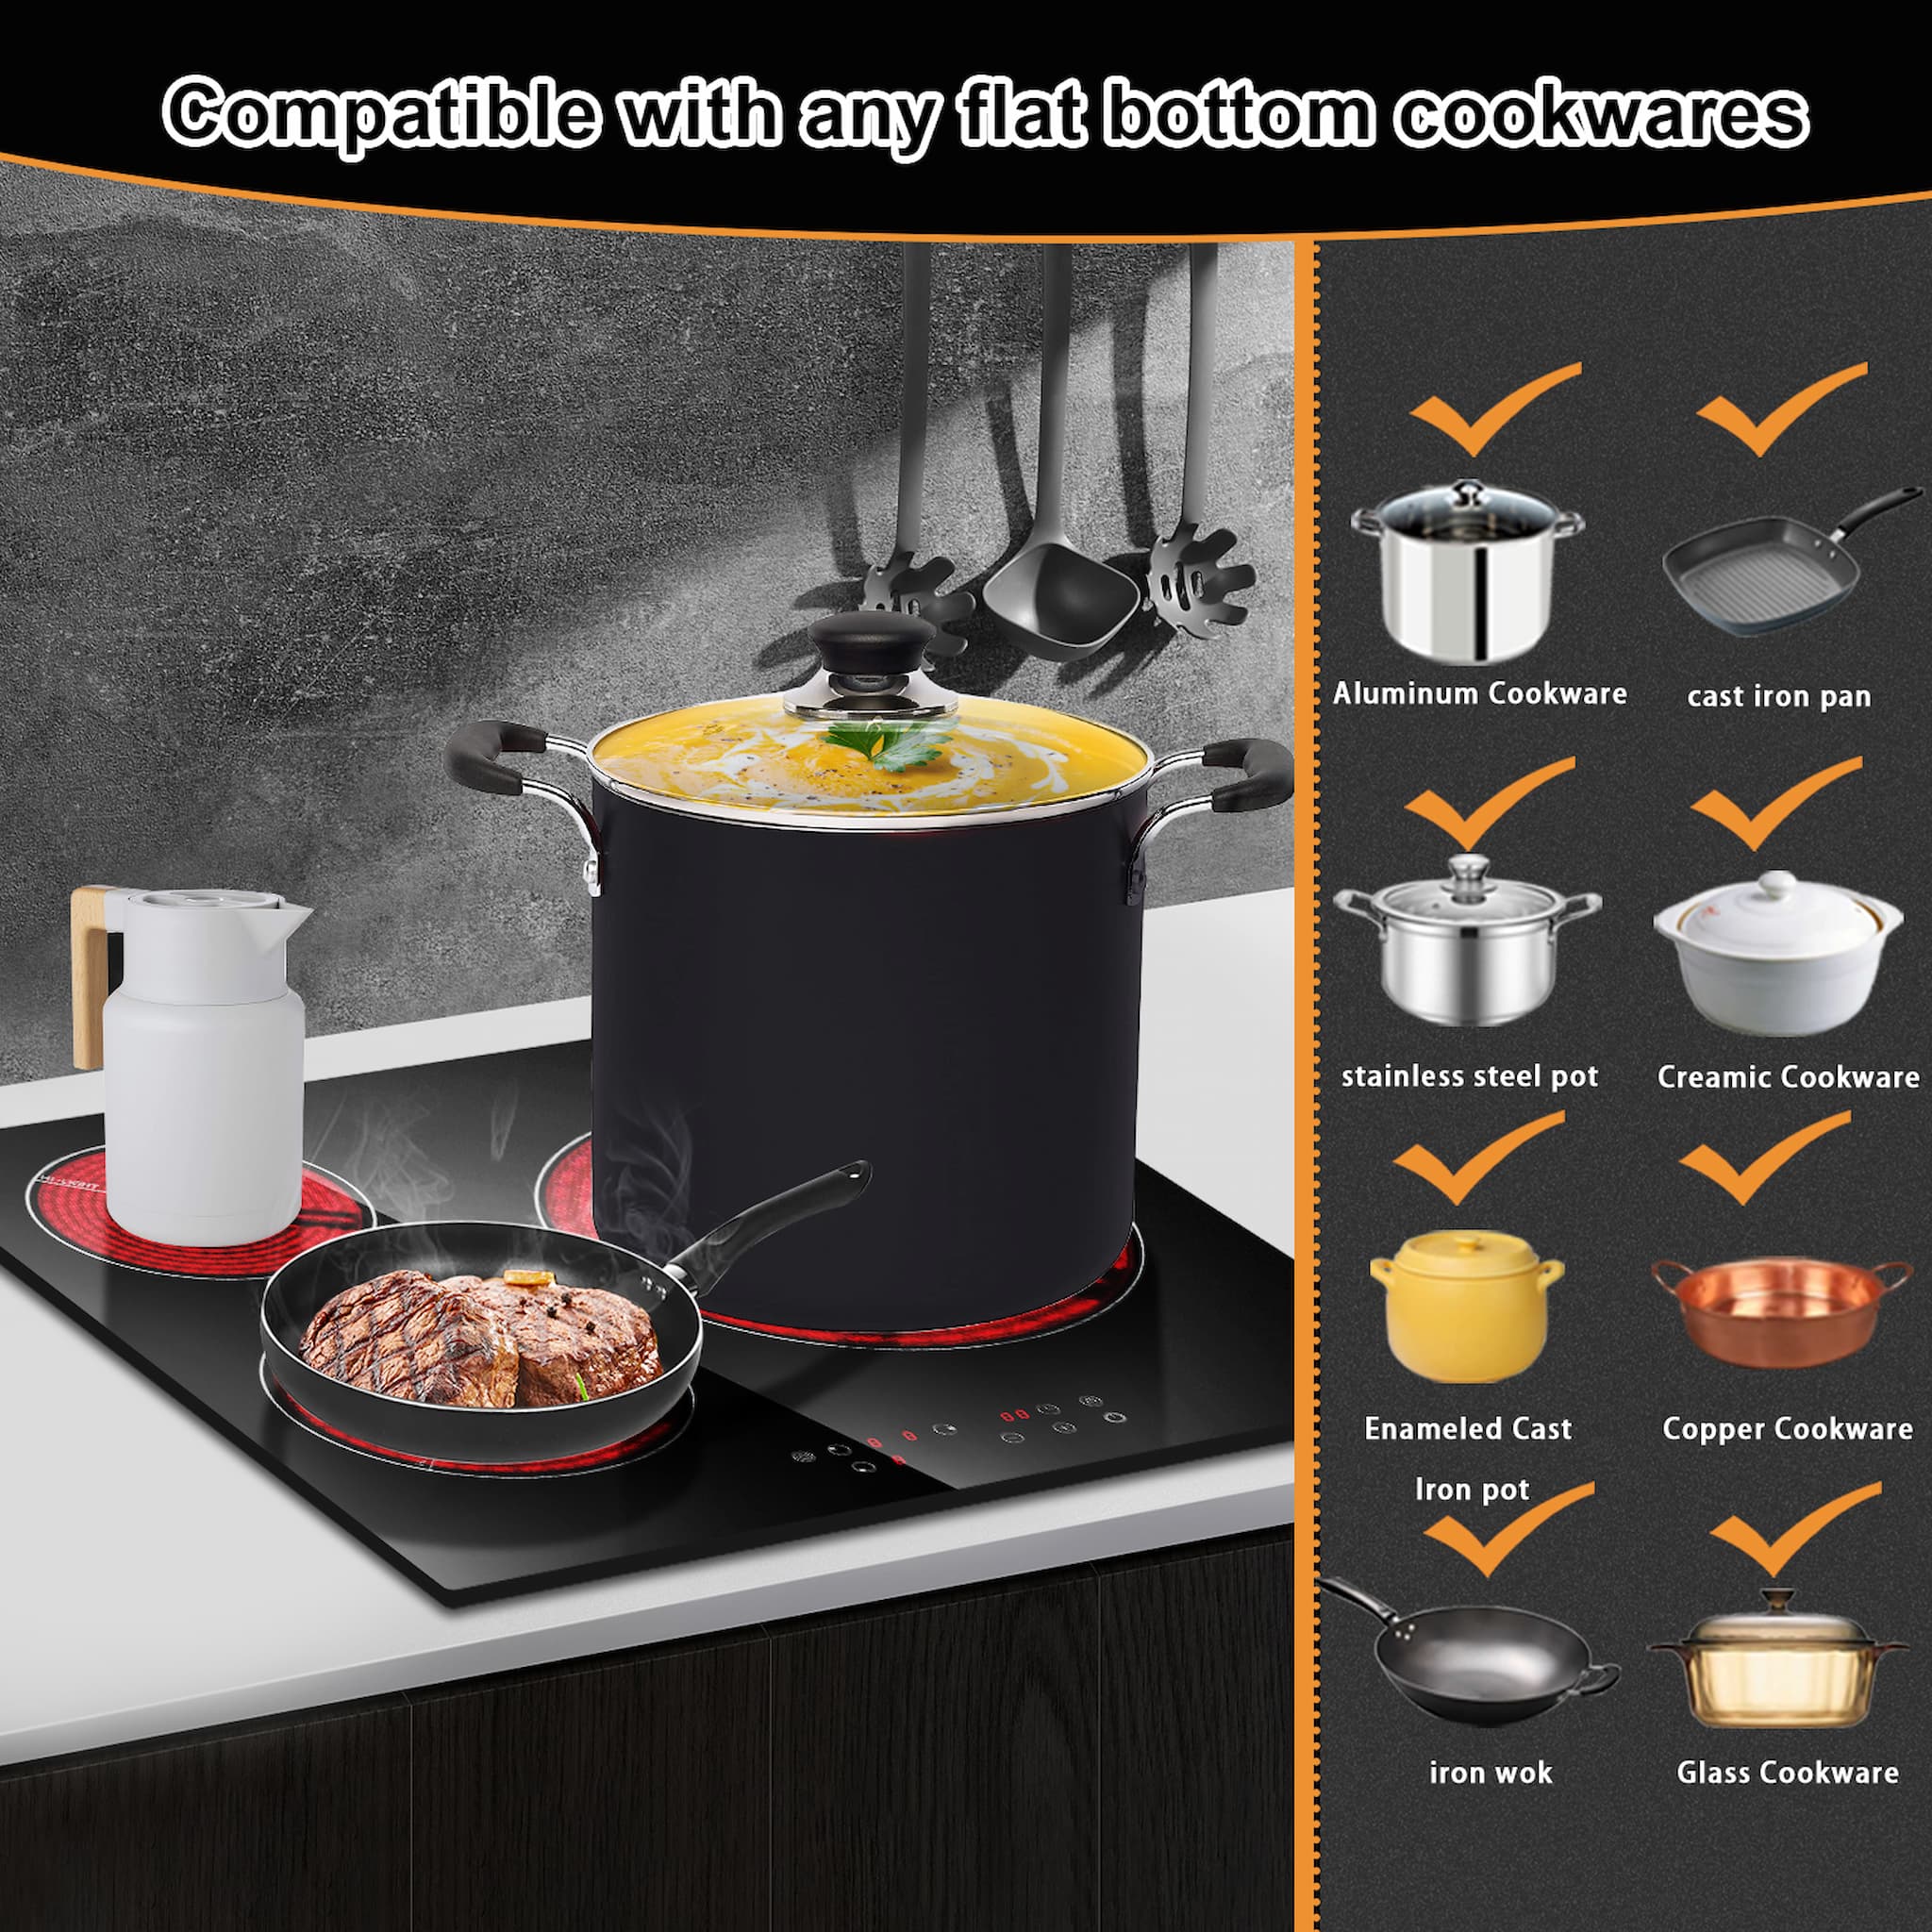 Compatible with any flat bottom cookware